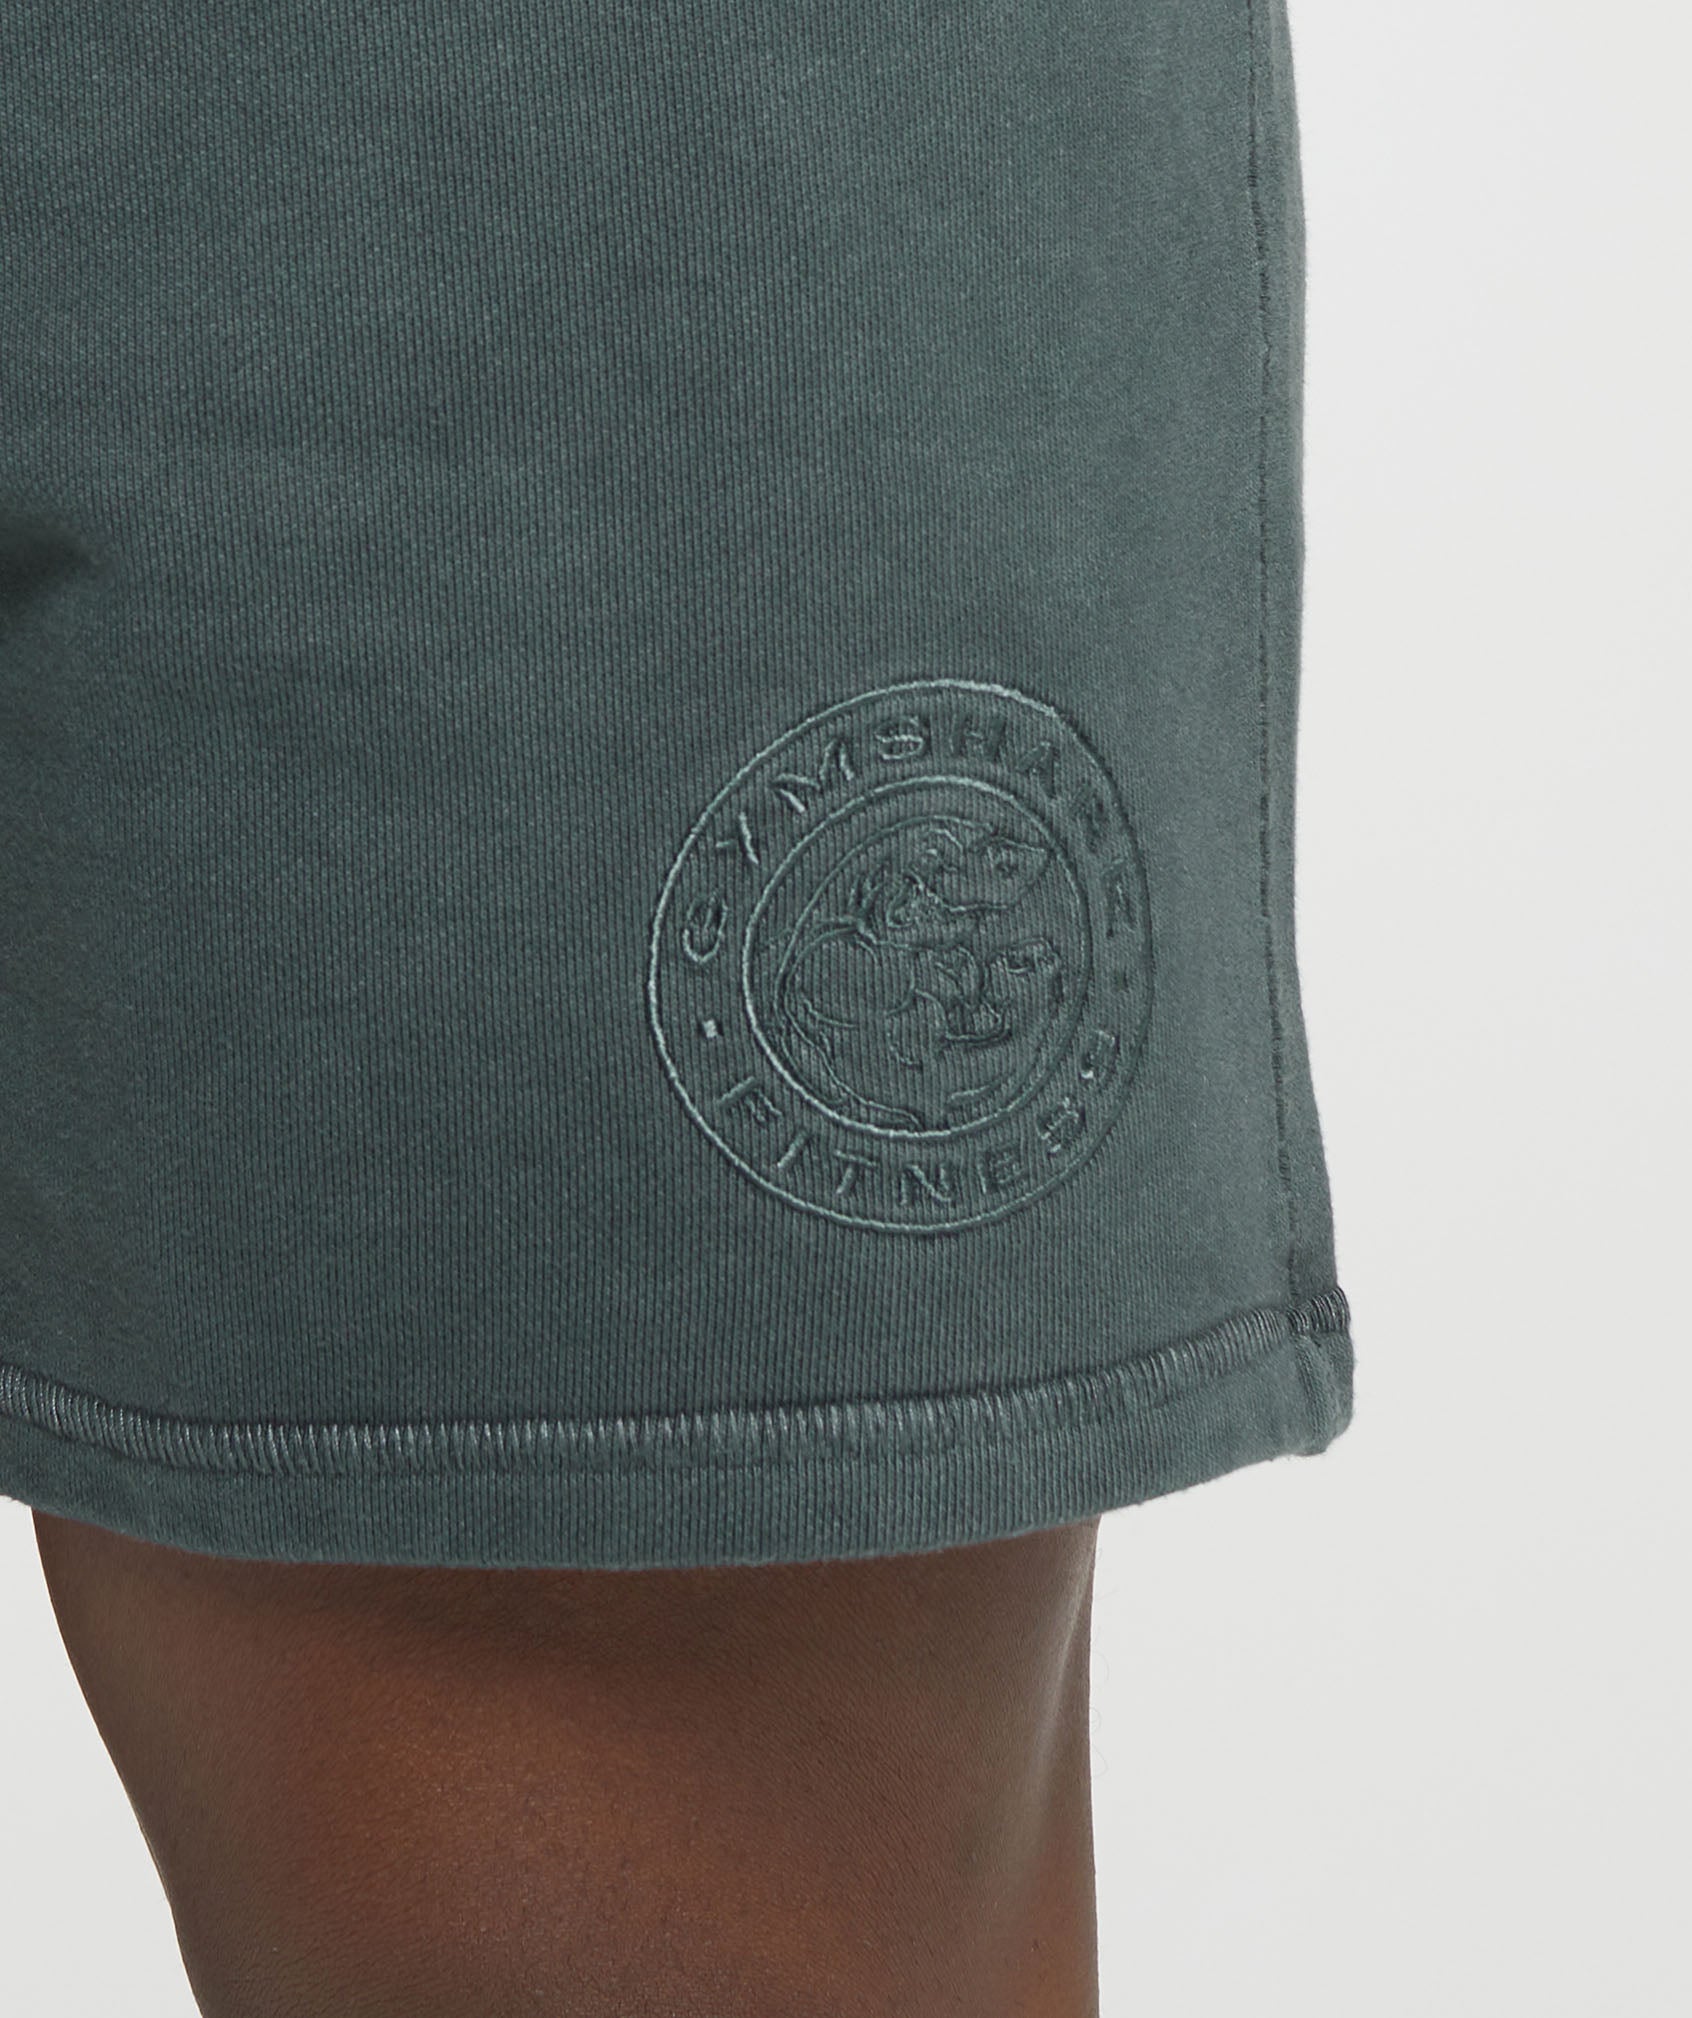 Premium Legacy Shorts in Cargo Teal - view 5